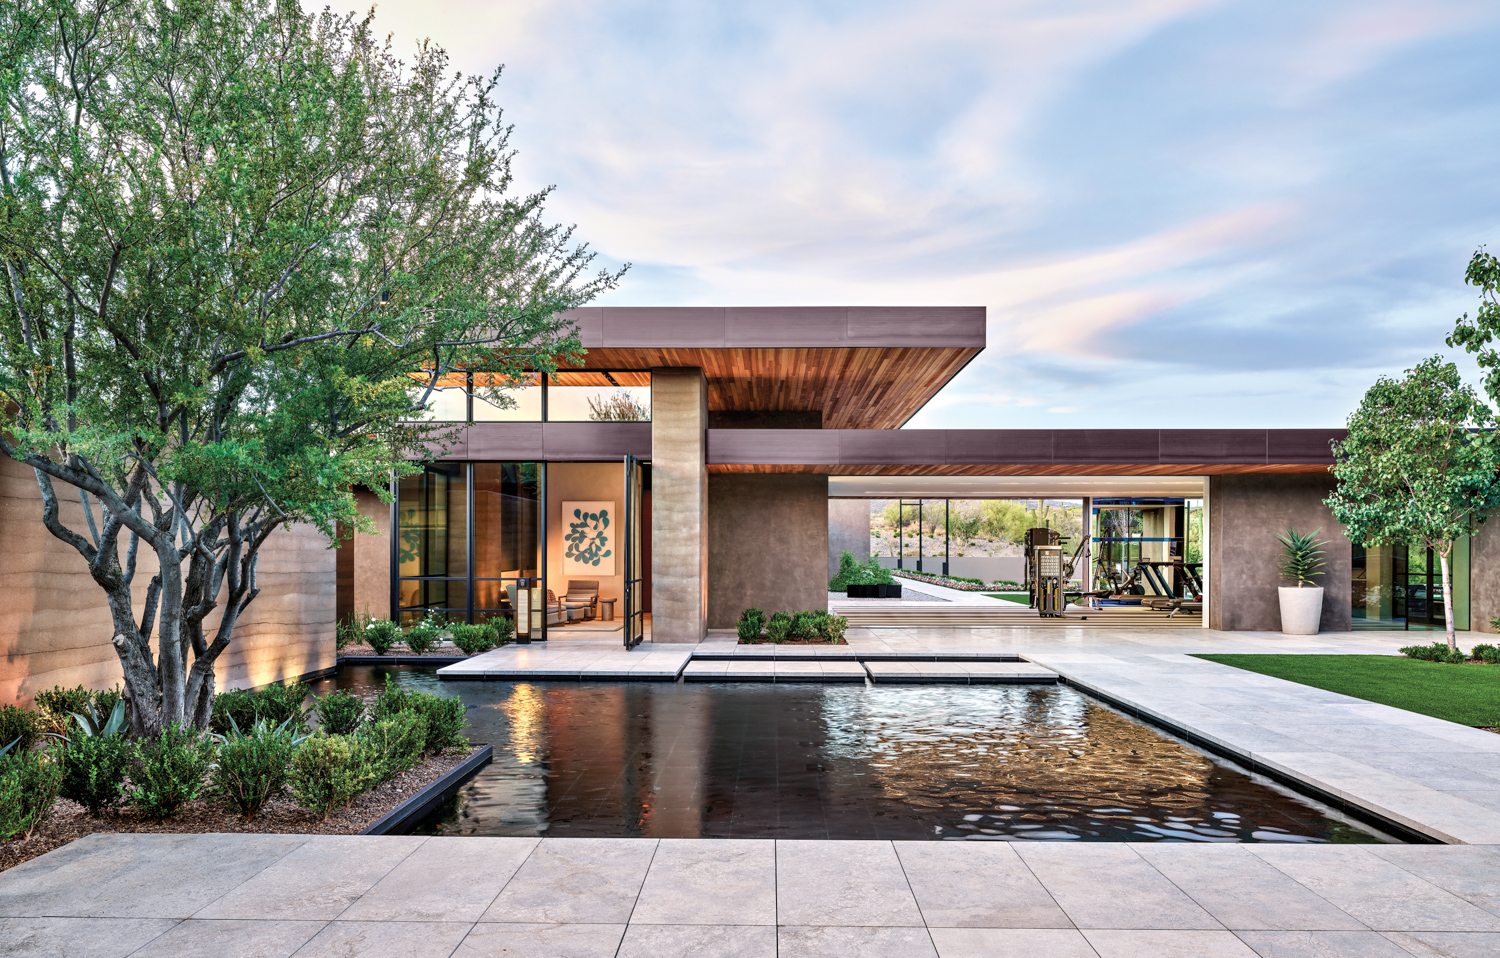 This Modernist Arizona Home Looks Like It Rose From The Desert